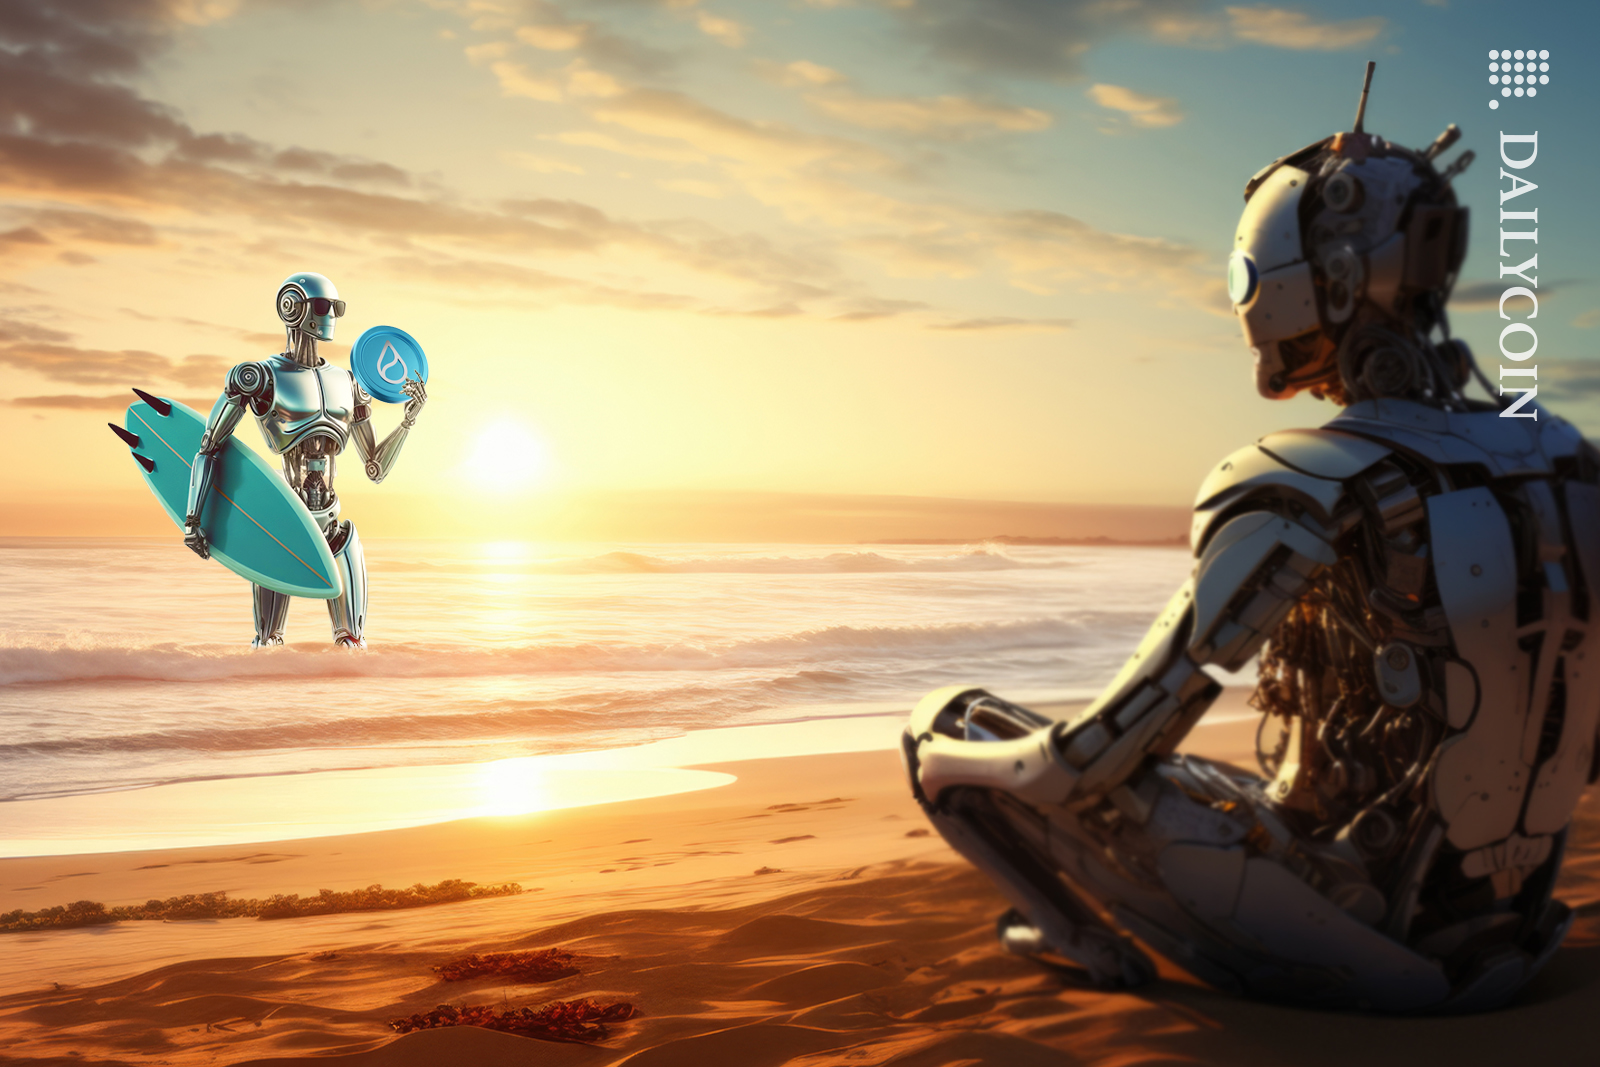 Robot seeing his friend return from surfing. Robot comes back with a Sui token in the calm waters.